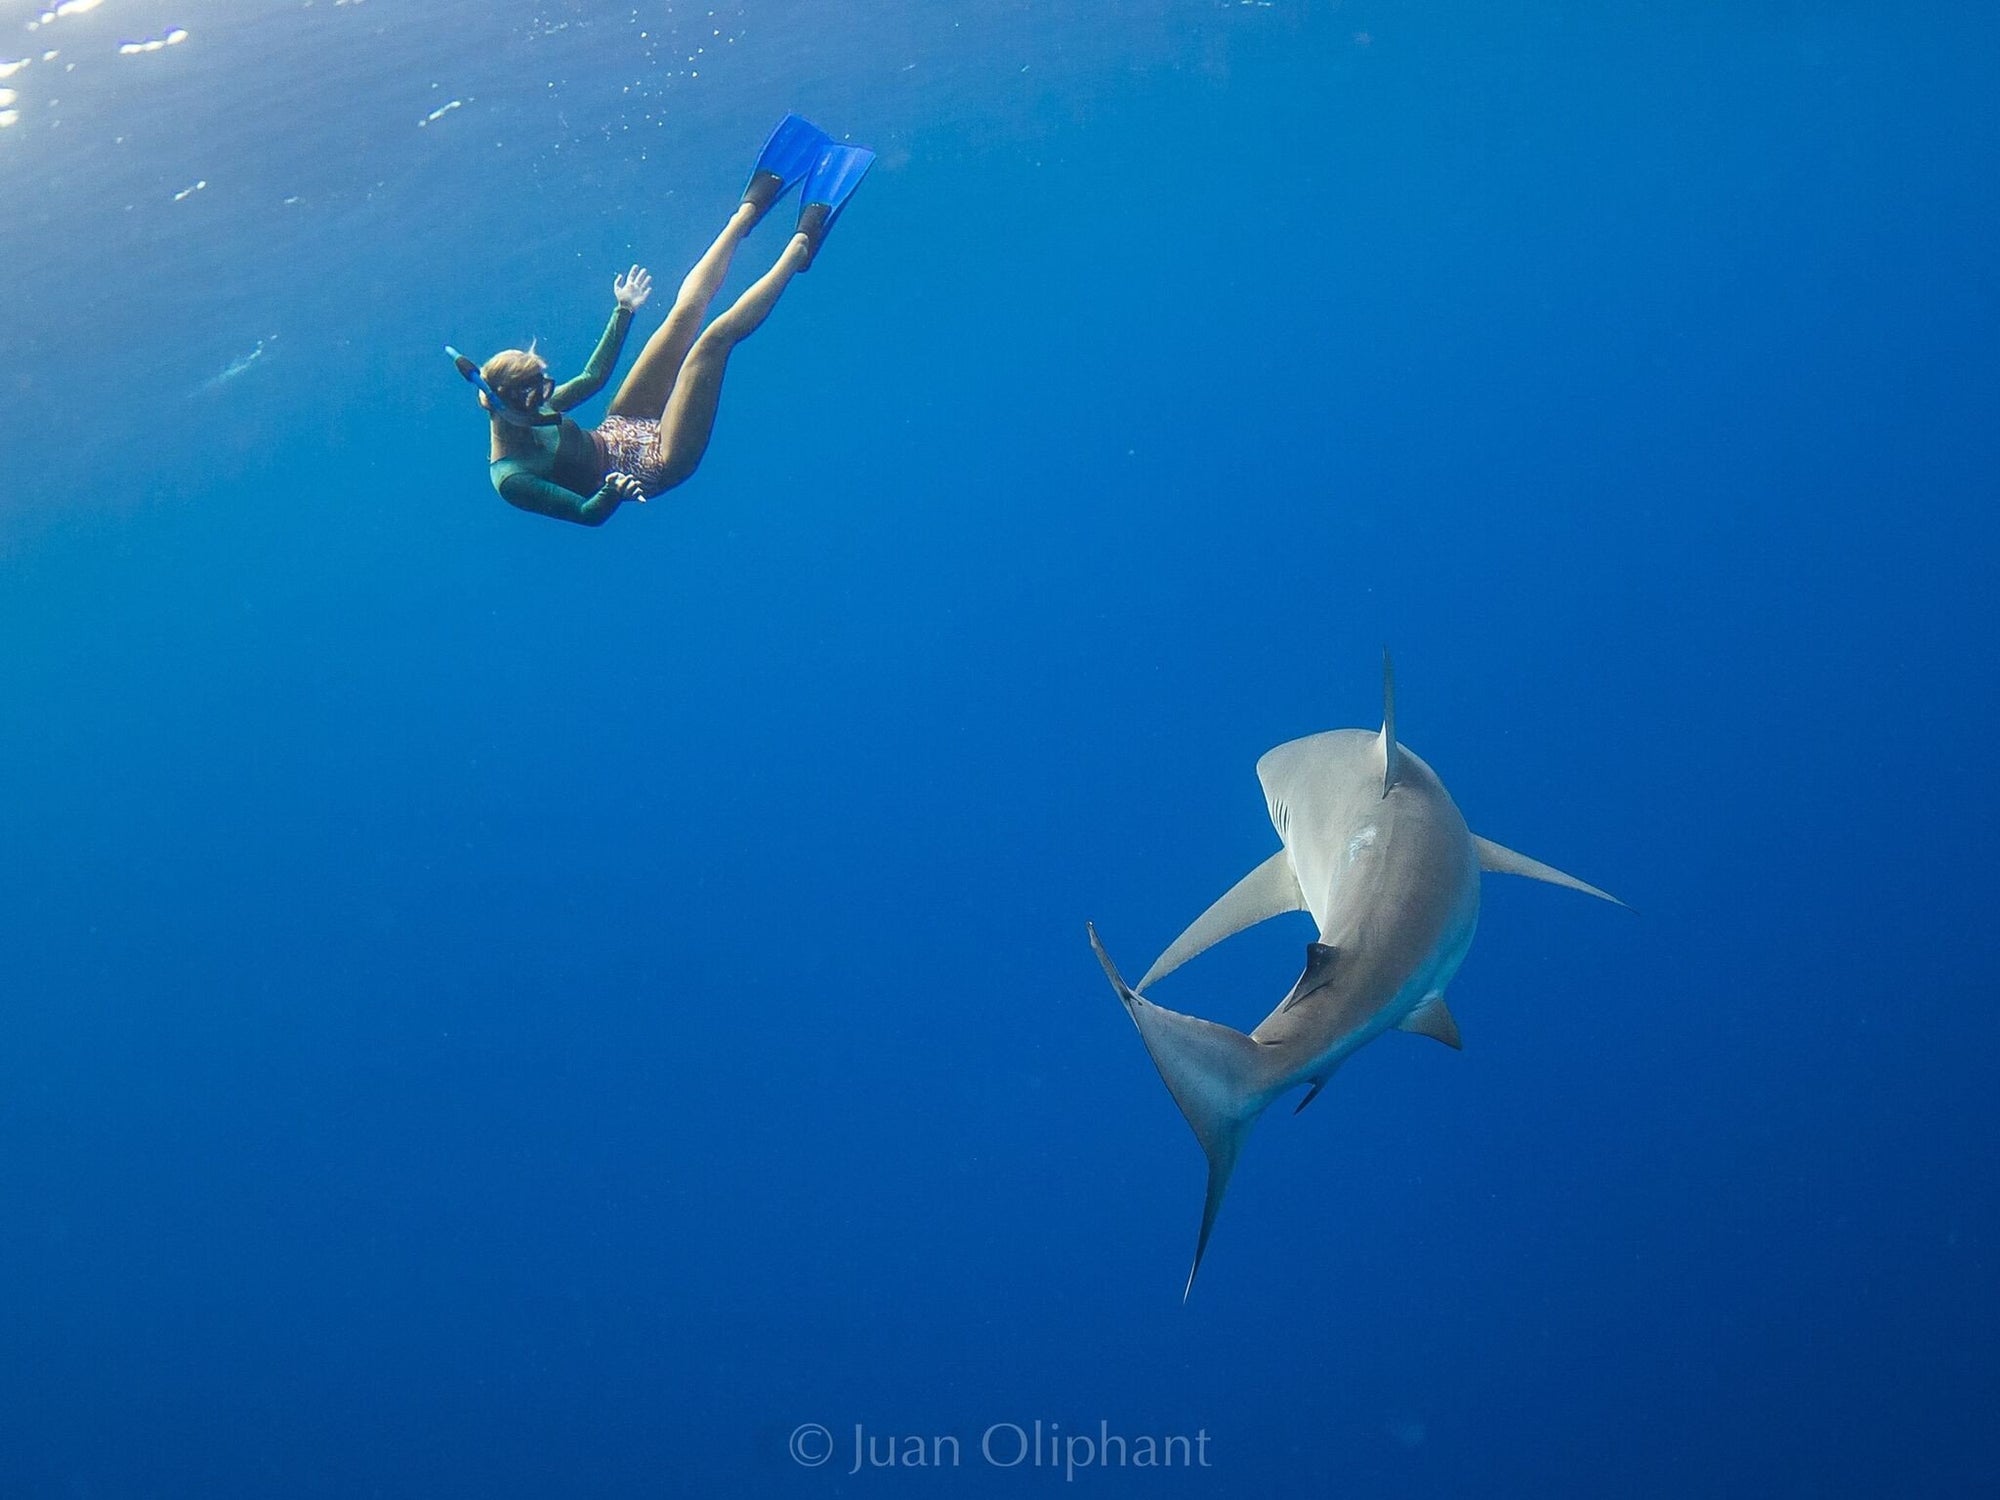 One Ocean Diving: What its like to Swim with Sharks in Hawaii